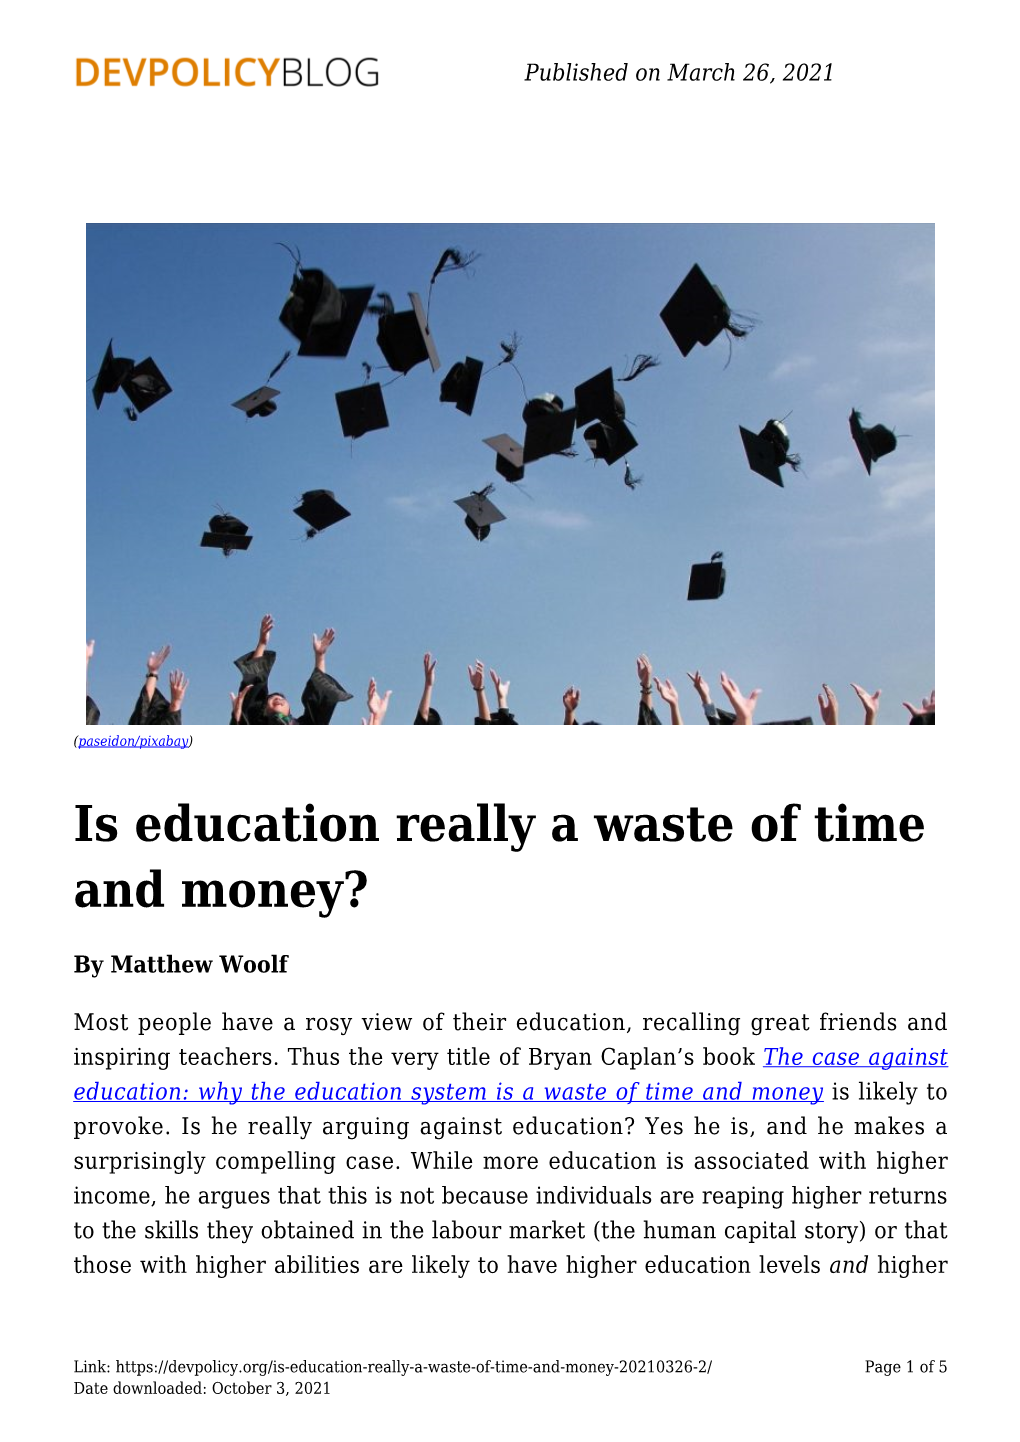 Is Education Really a Waste of Time and Money?